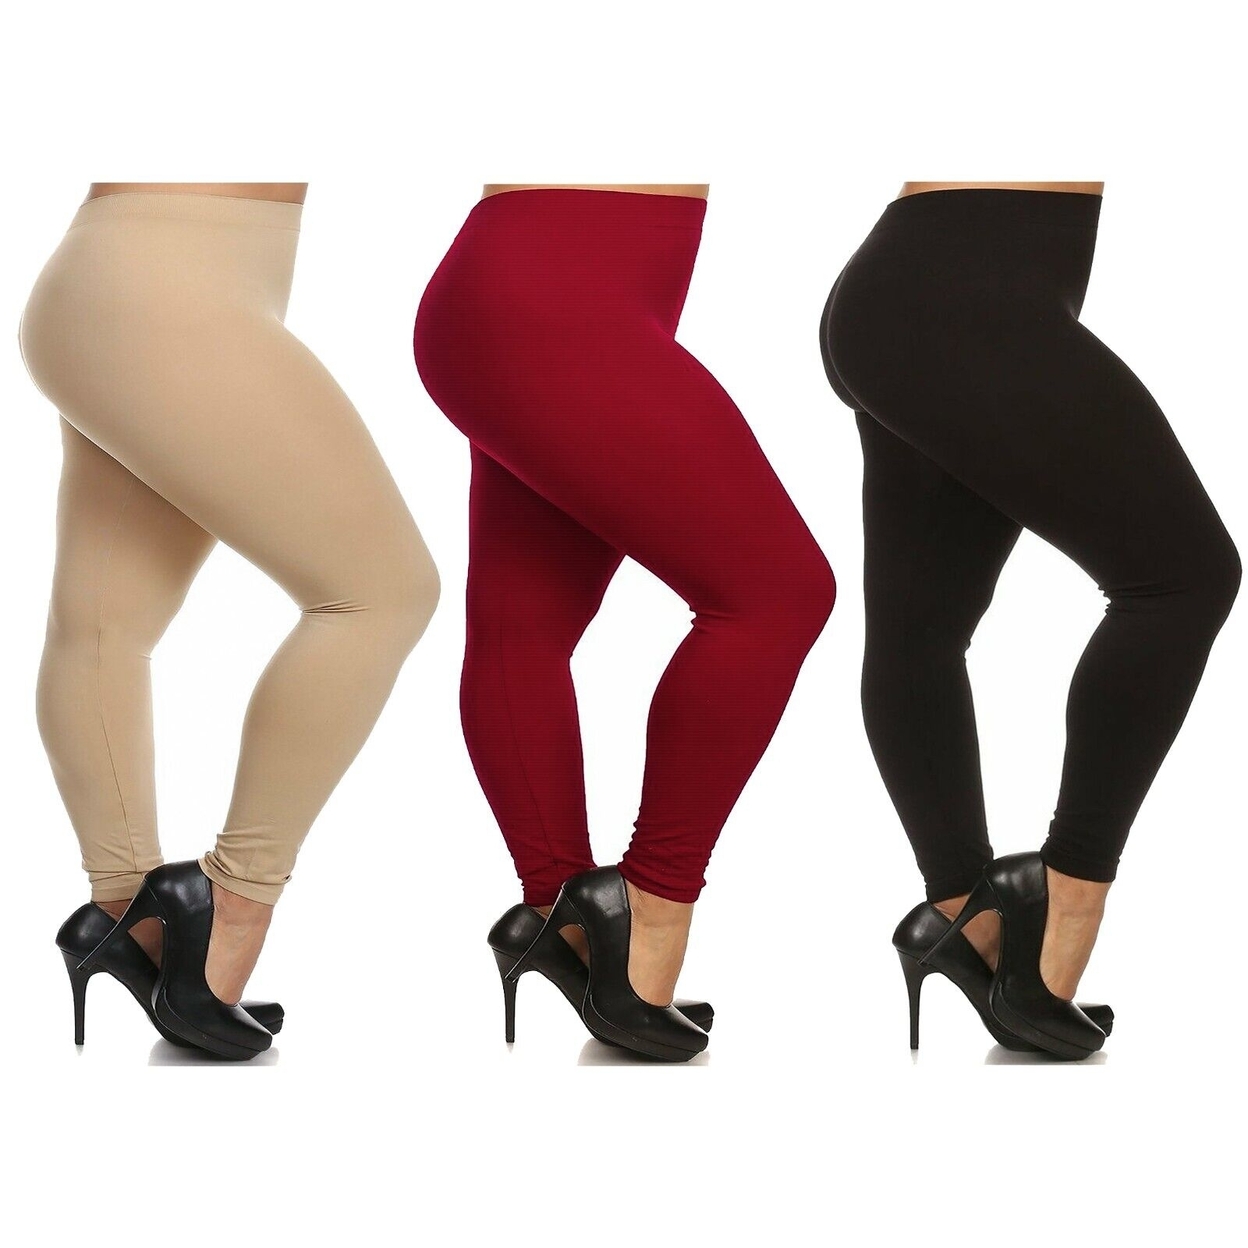 3-Pack: Women's Casual Ultra-Soft Smooth High Waisted Athletic Active Yoga Leggings Plus Size Available - Beige,black, Red, 4x